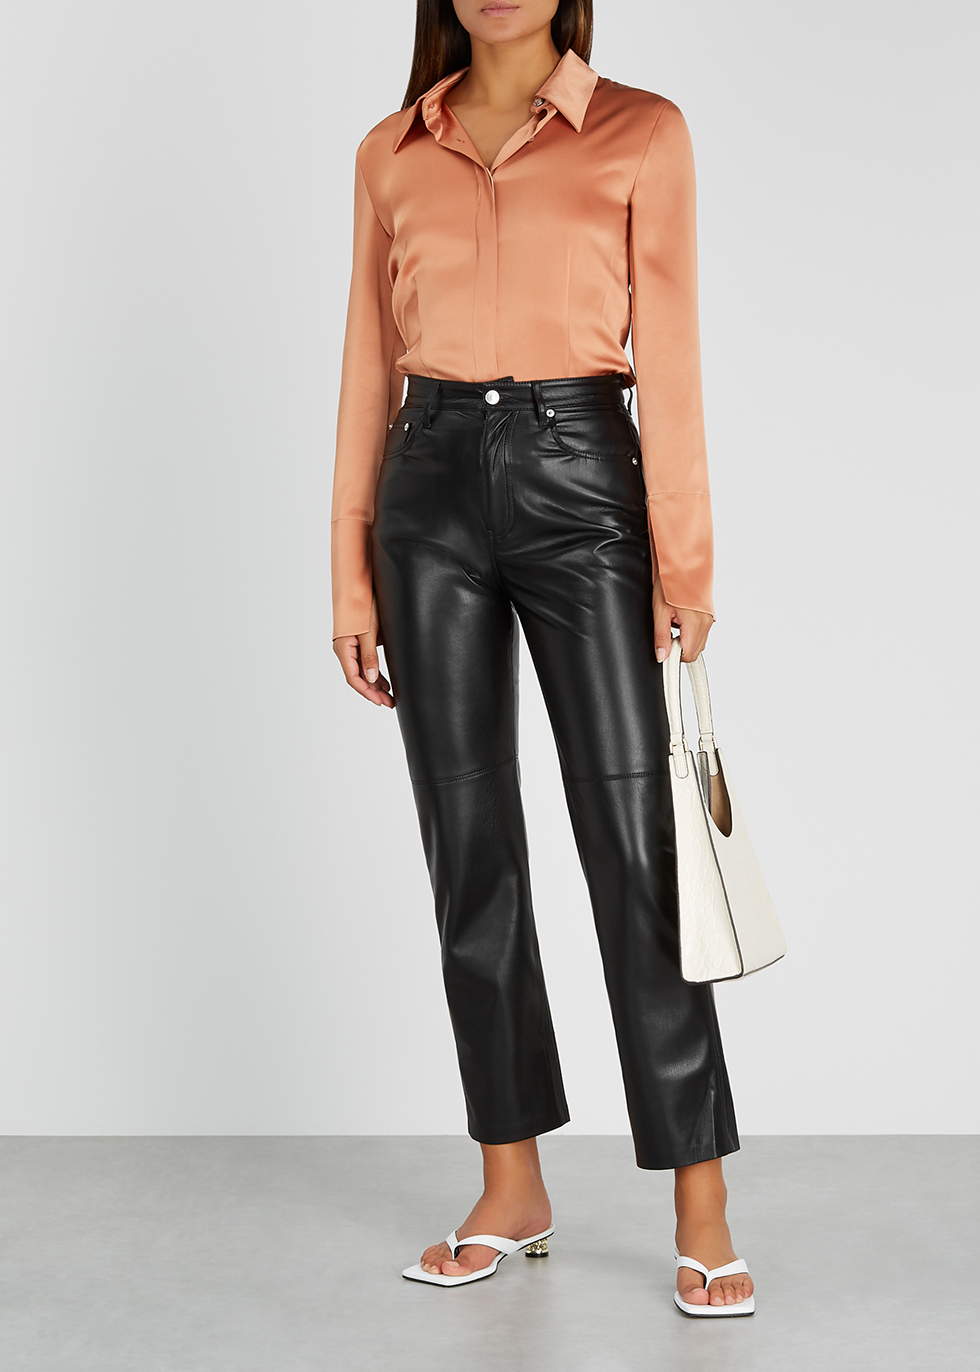 Buy The Vanca Women Black Leather Trousers  Trousers for Women 120324   Myntra